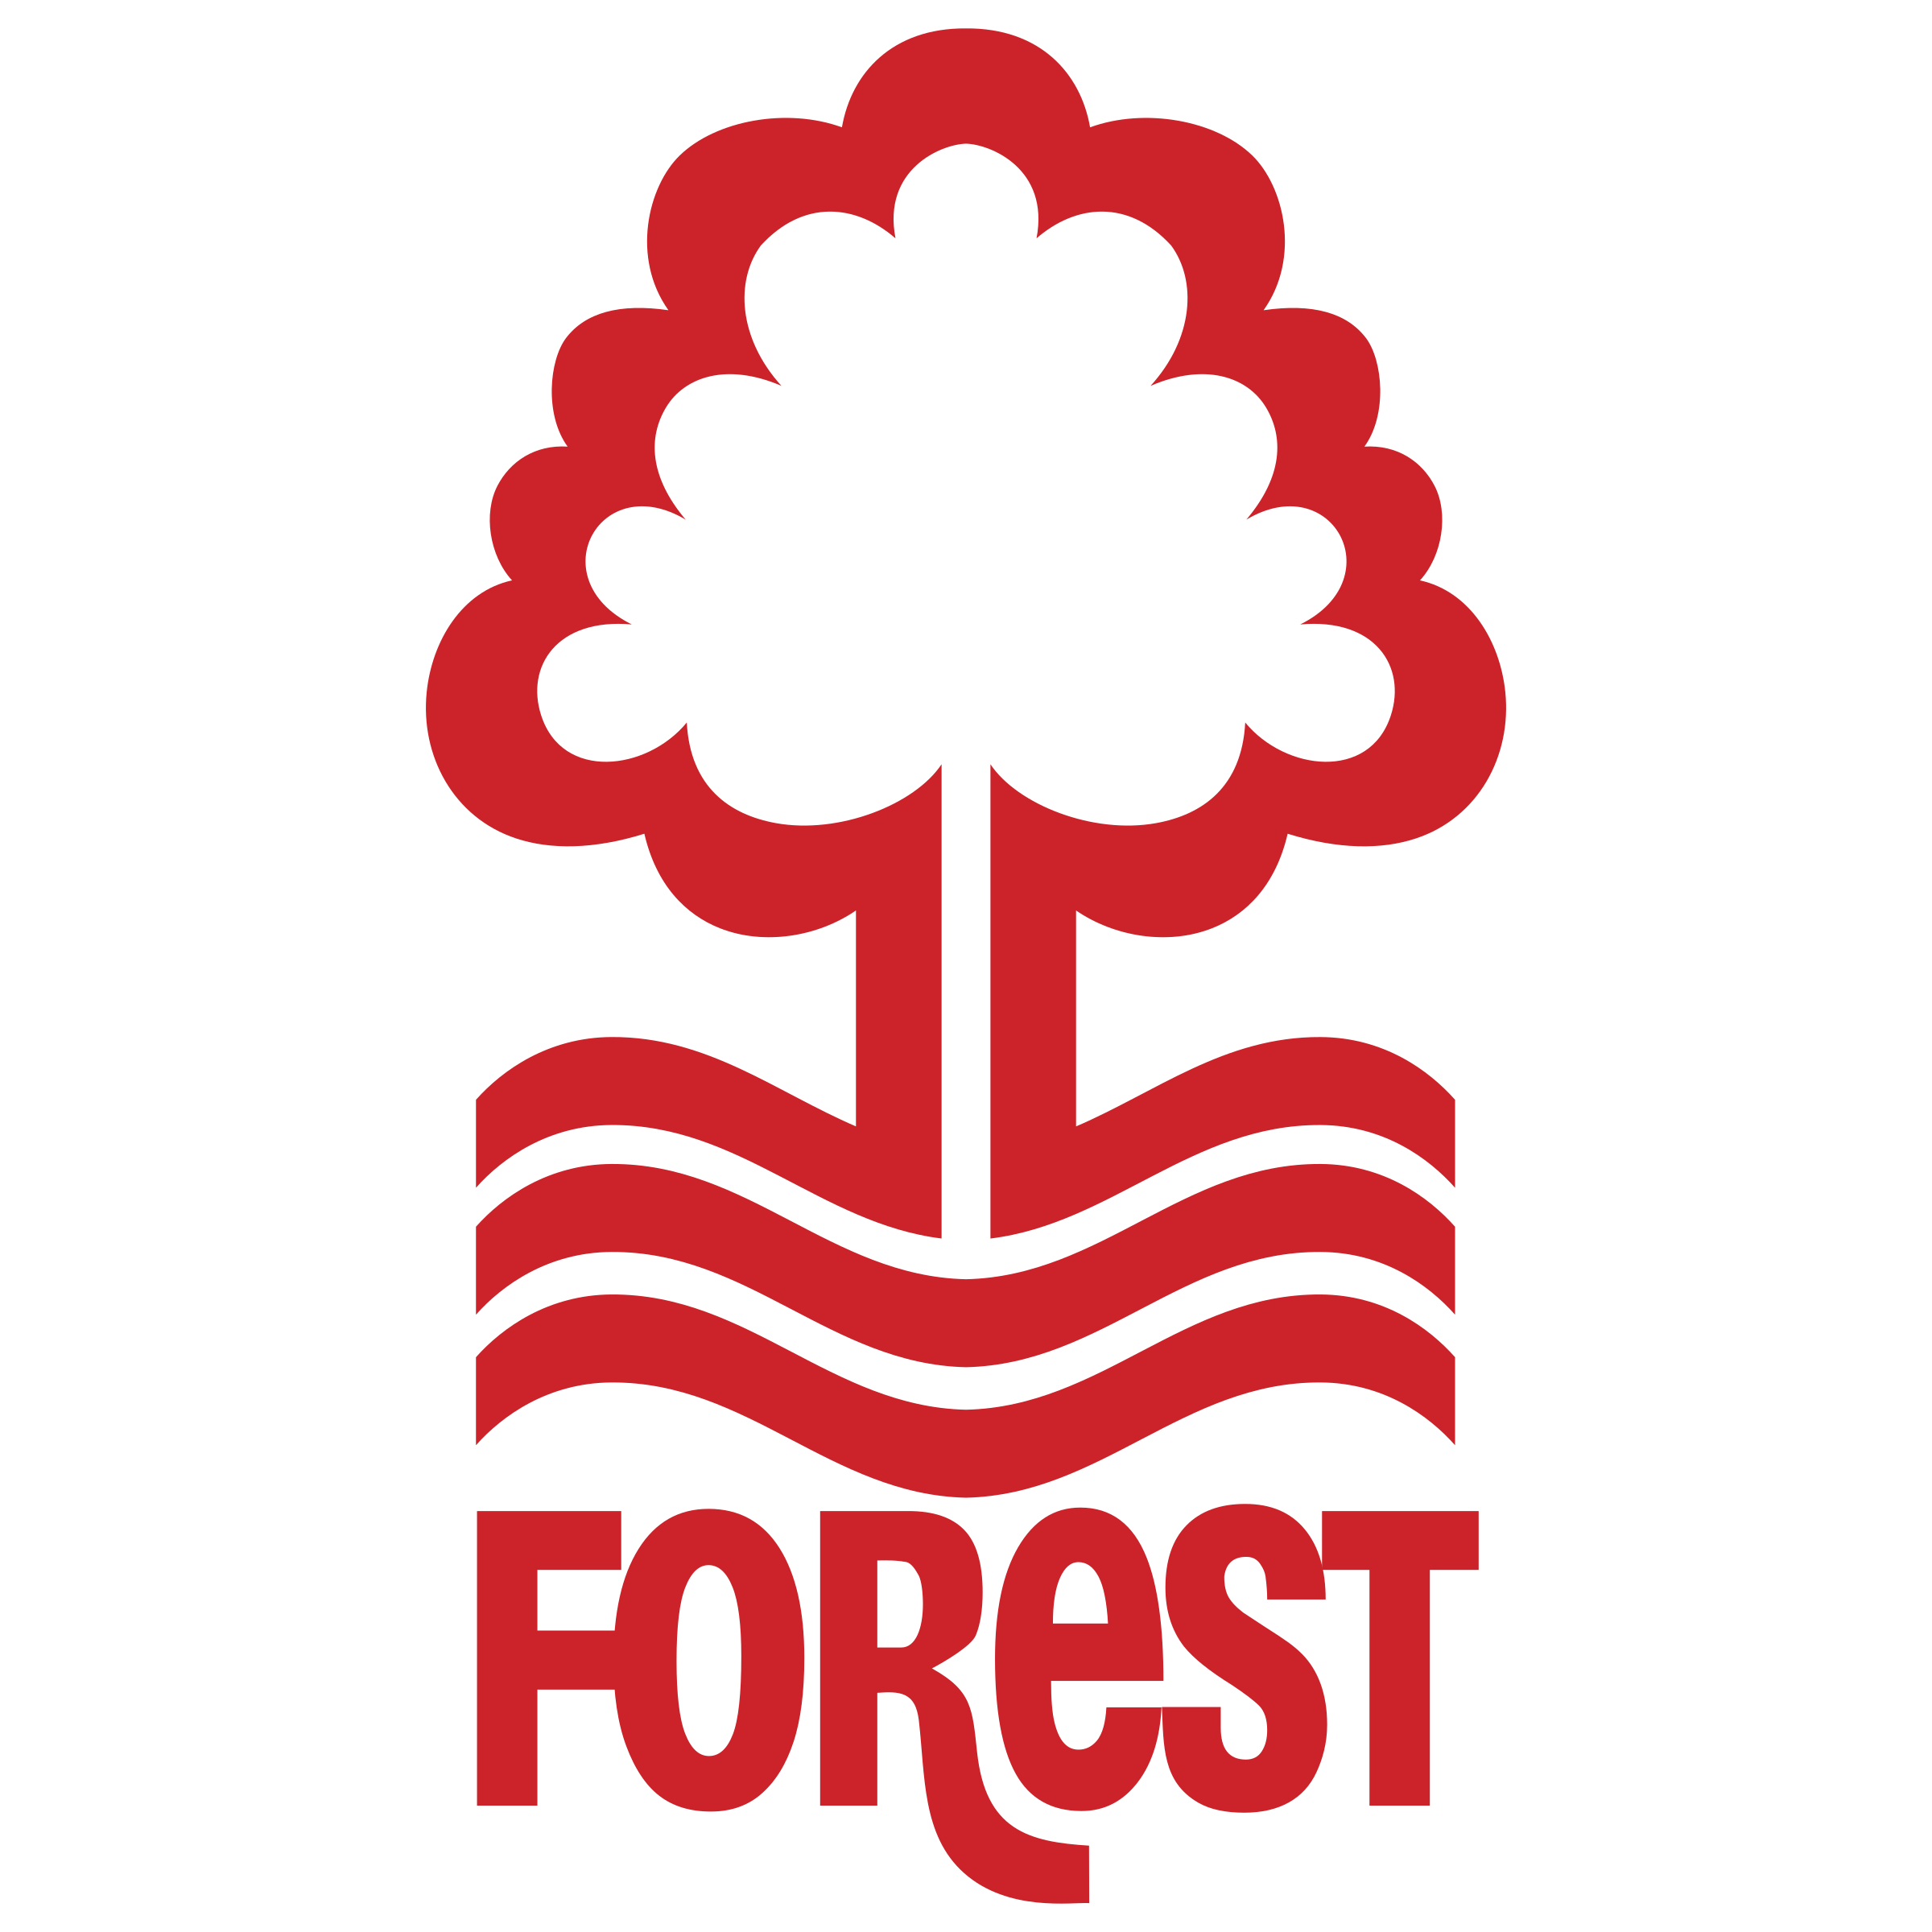 News update:From what it looks it a last warning for Steve Cooper of Nottingham Forest